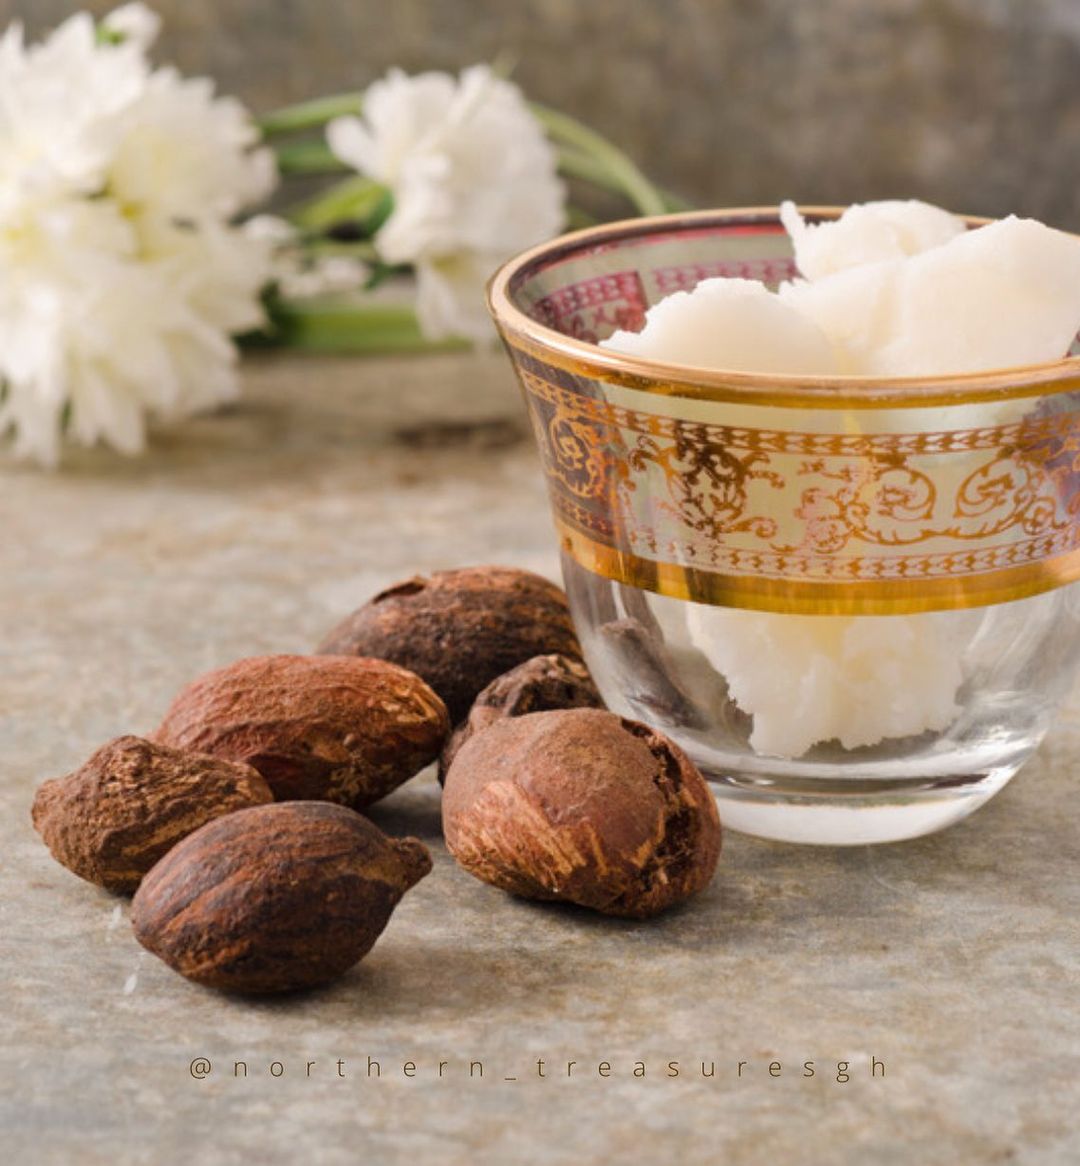 Unrefined Shea Butter to Use in DIY Hair Masks